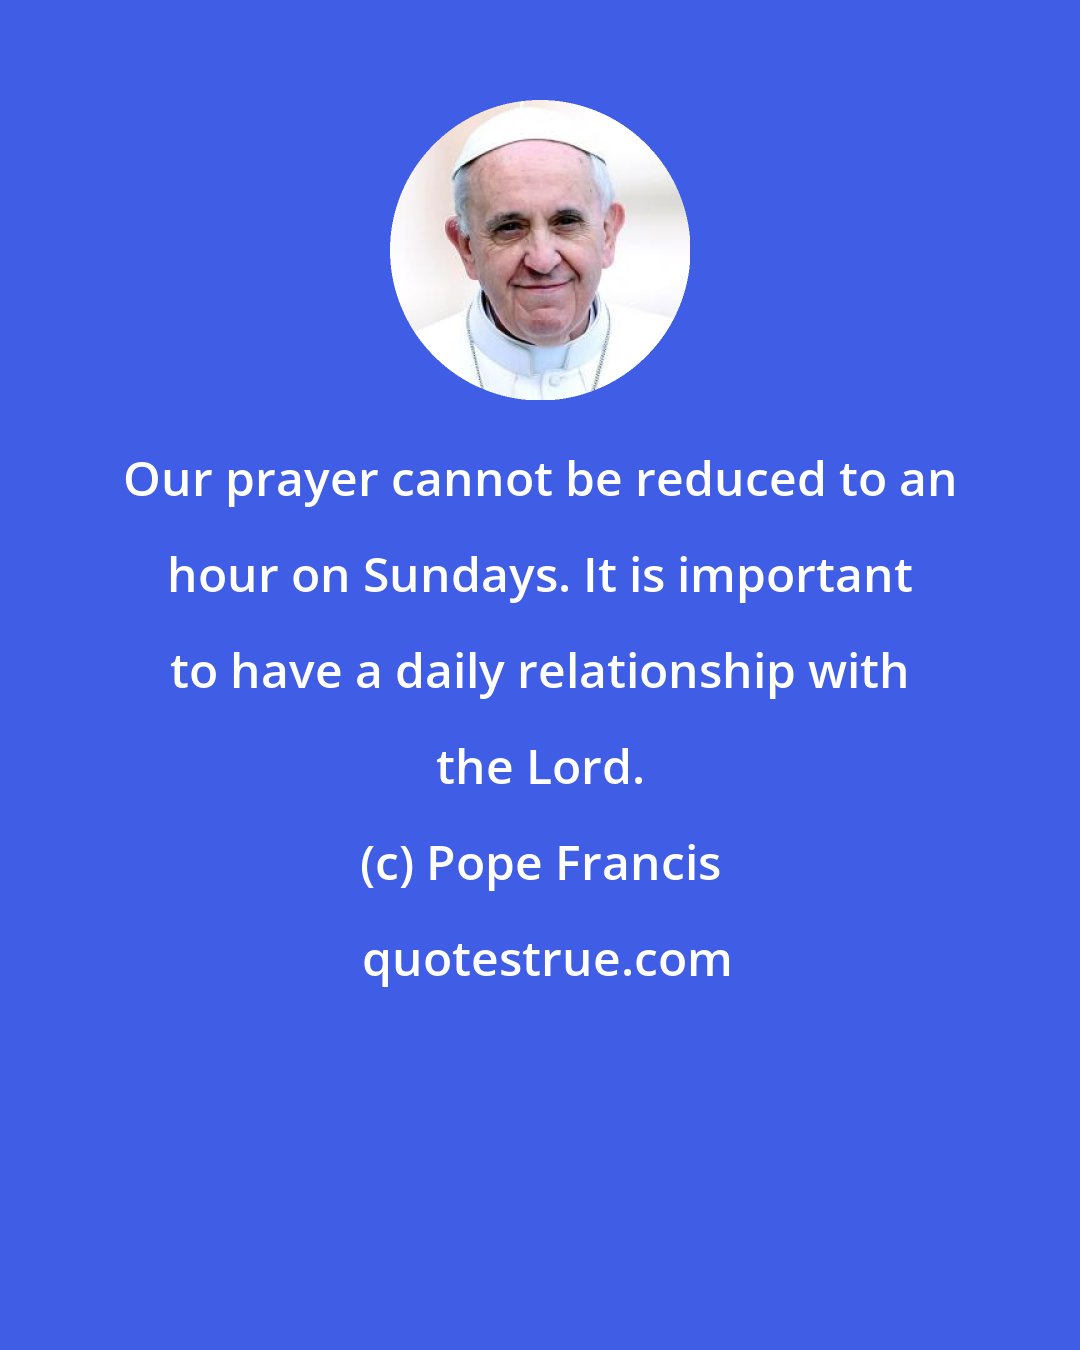 Pope Francis: Our prayer cannot be reduced to an hour on Sundays. It is important to have a daily relationship with the Lord.